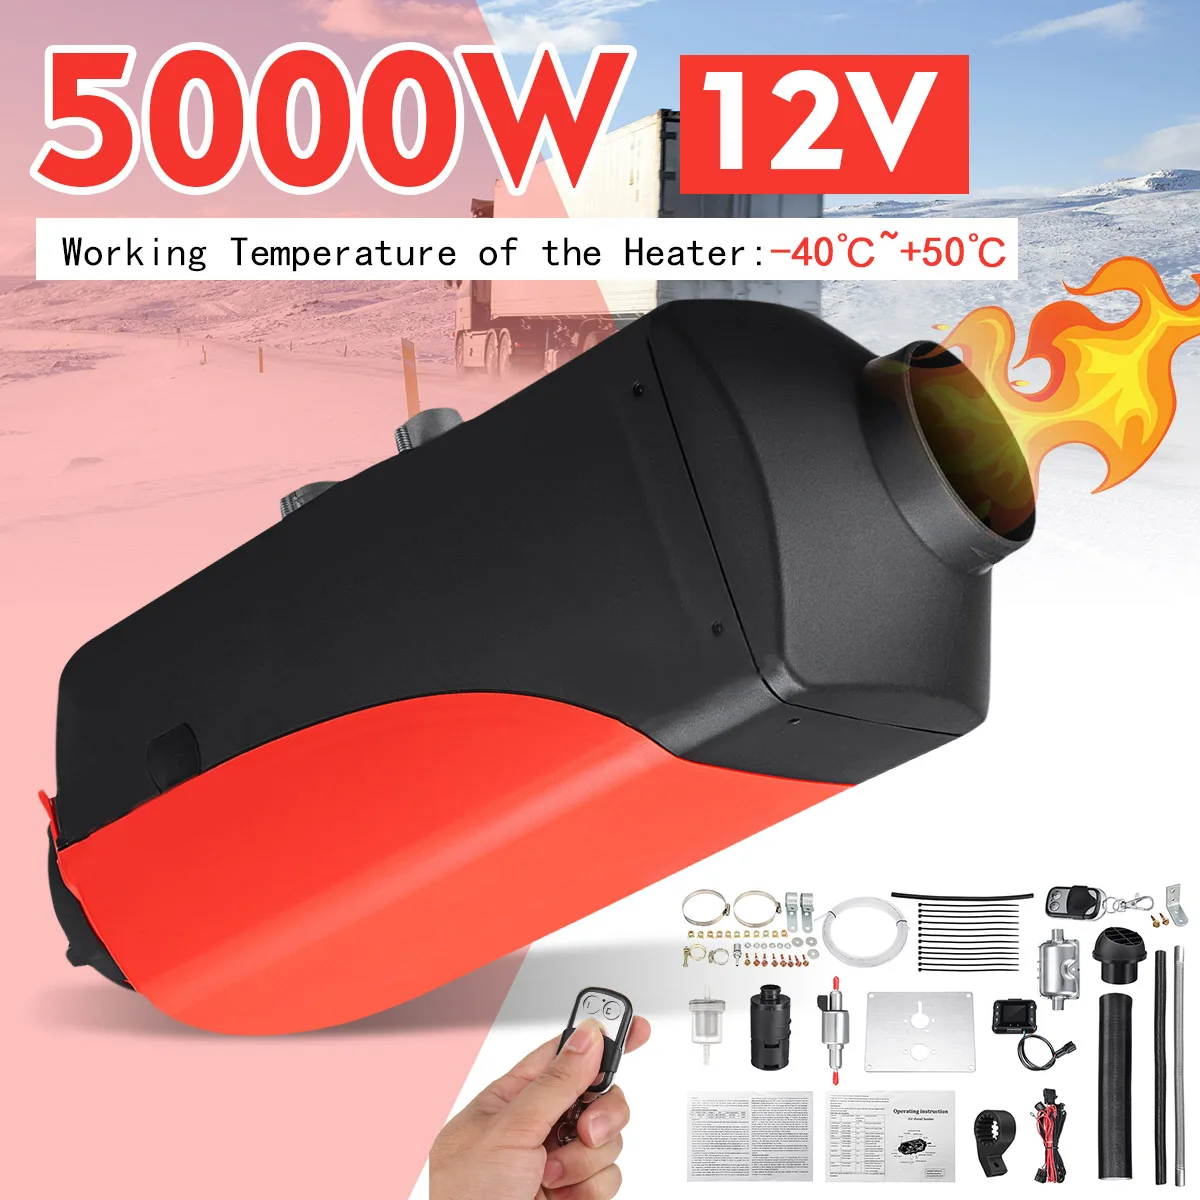 

12V 5KW Air Heater Tank 2x Vent,Duct, Thermostat Motorhome Car Heater With Remote LCD Digital Display for Boat Motorhome